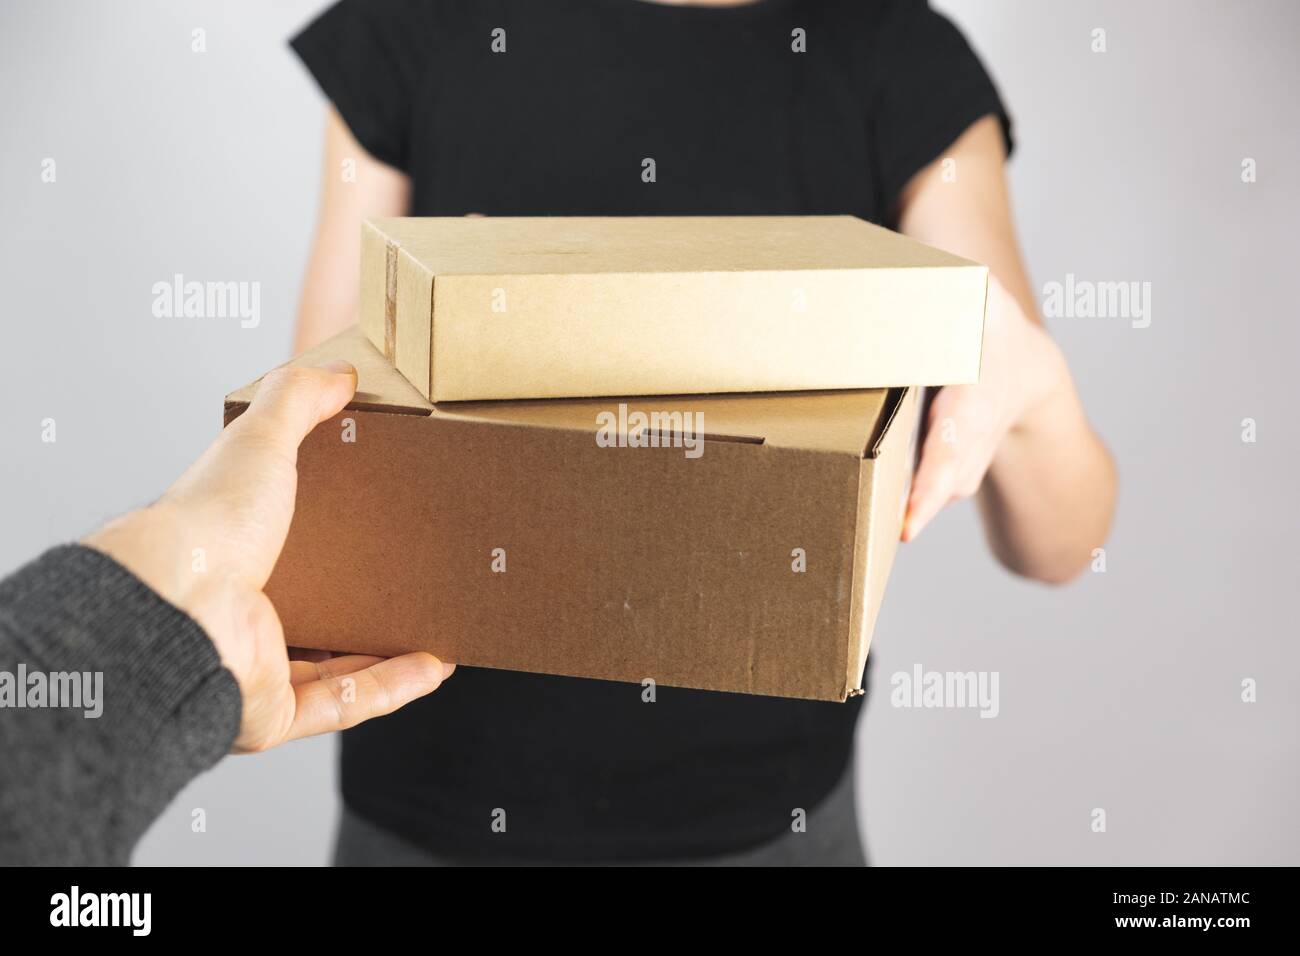 Taking or giving boxes with goods. Delivery, postal service or mailman concept: giving package from hand to hand Stock Photo